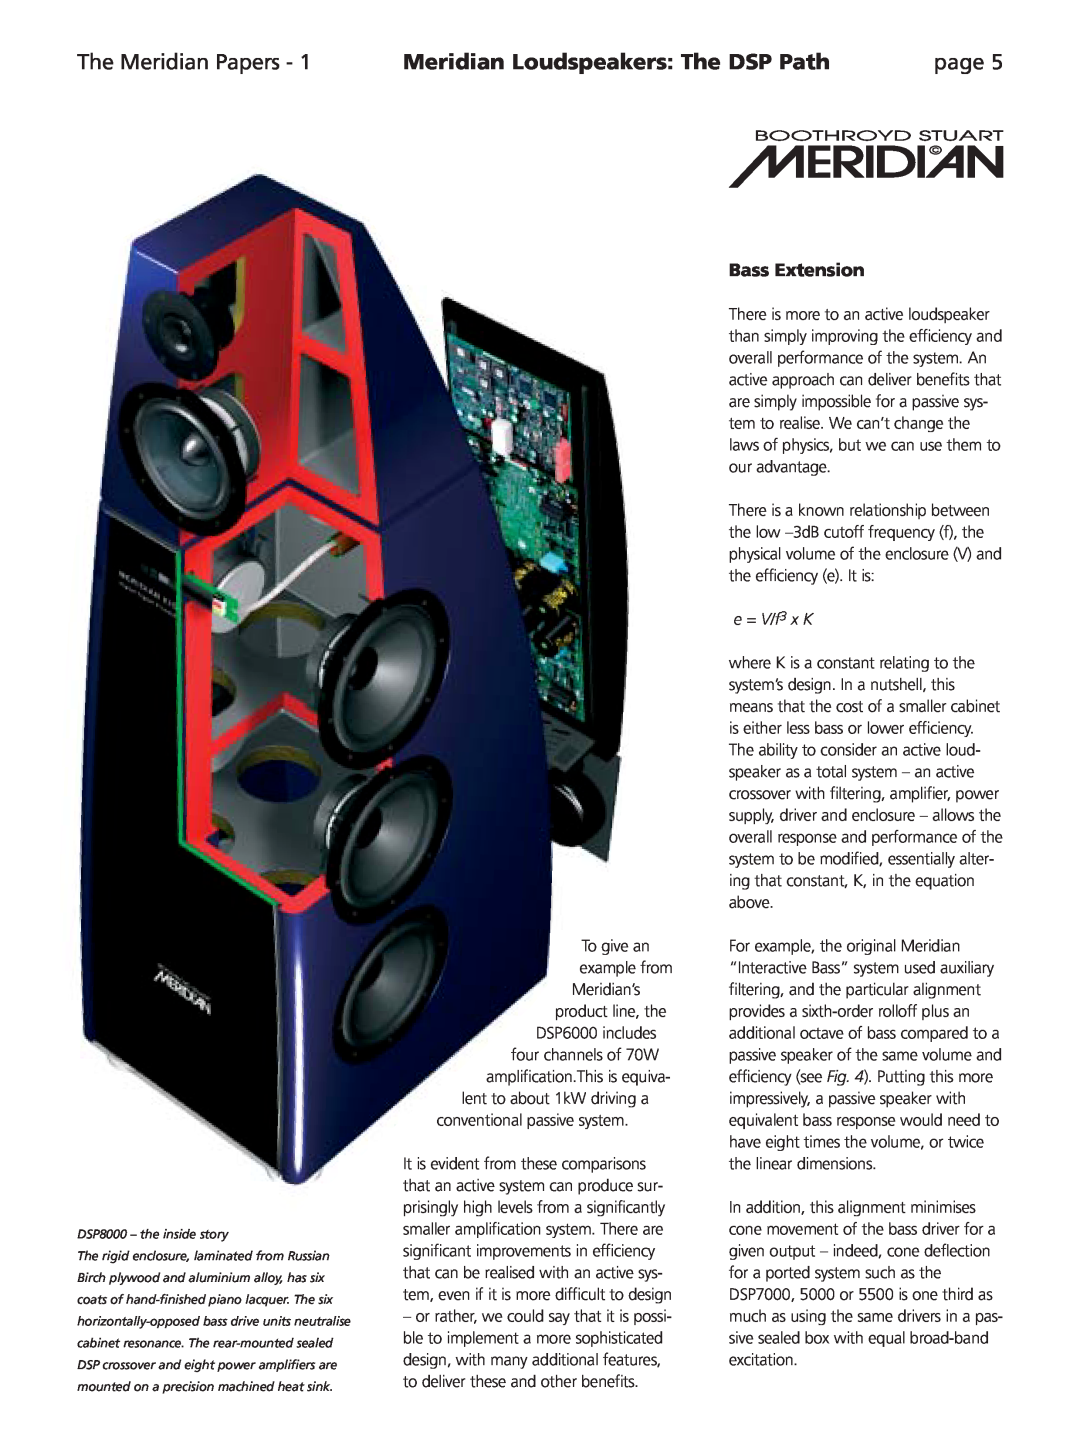 Meridian Audio Speaker manual Bass Extension, e = V/f3 x K, The Meridian Papers, Meridian Loudspeakers The DSP Path, page 